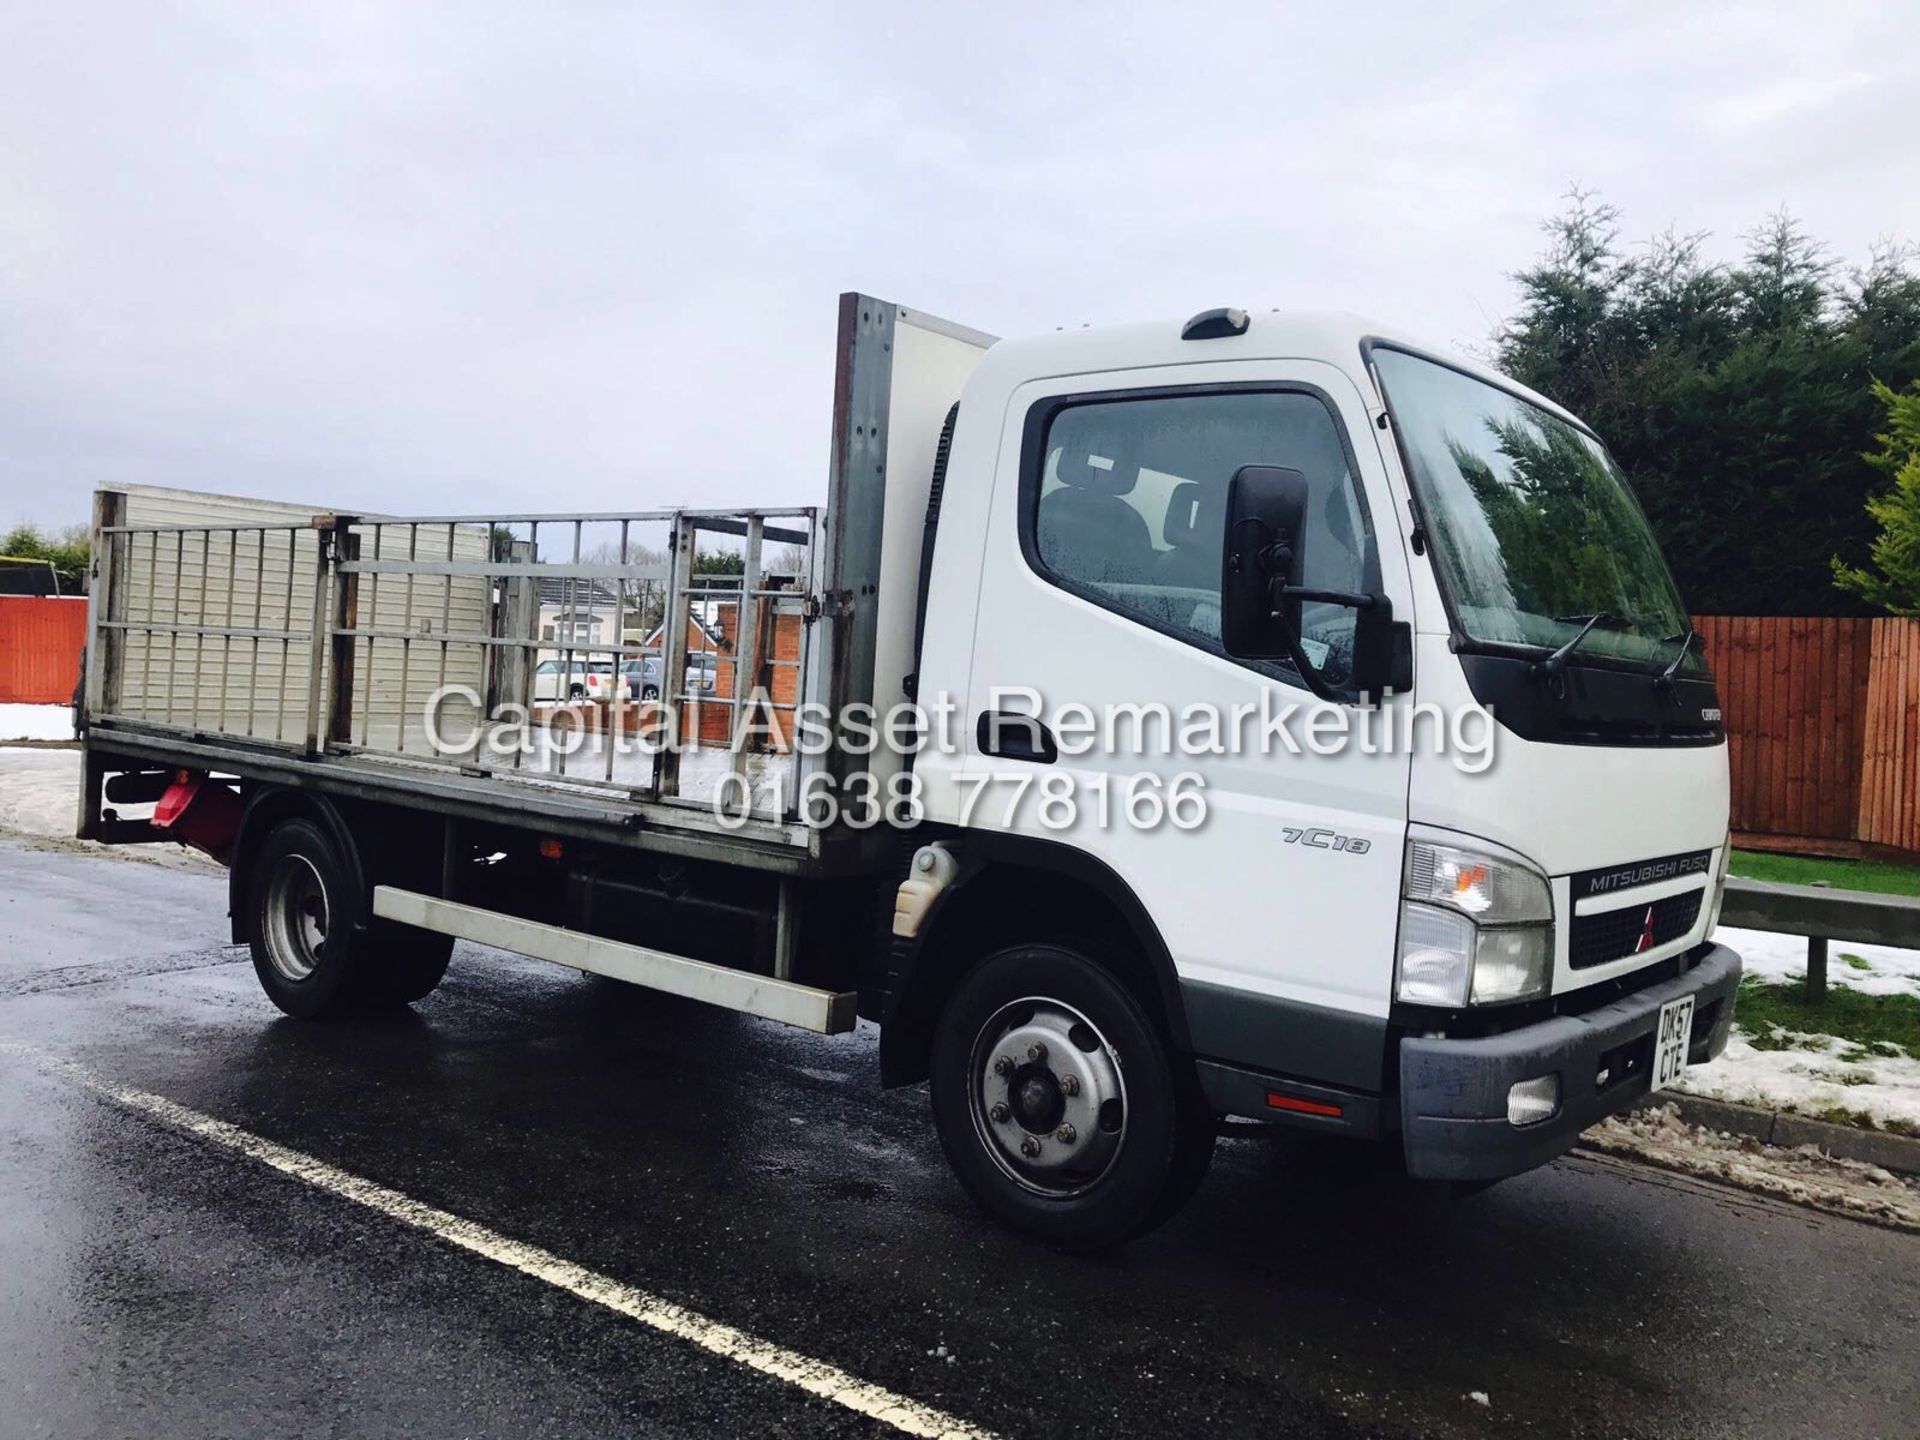 (ON SALE) MITSUBISHI FUSO CANTER 7C18 (2008 MODEL) 15FT LWB ***1 OWNER - ONLY 40,000 MILES FSH***